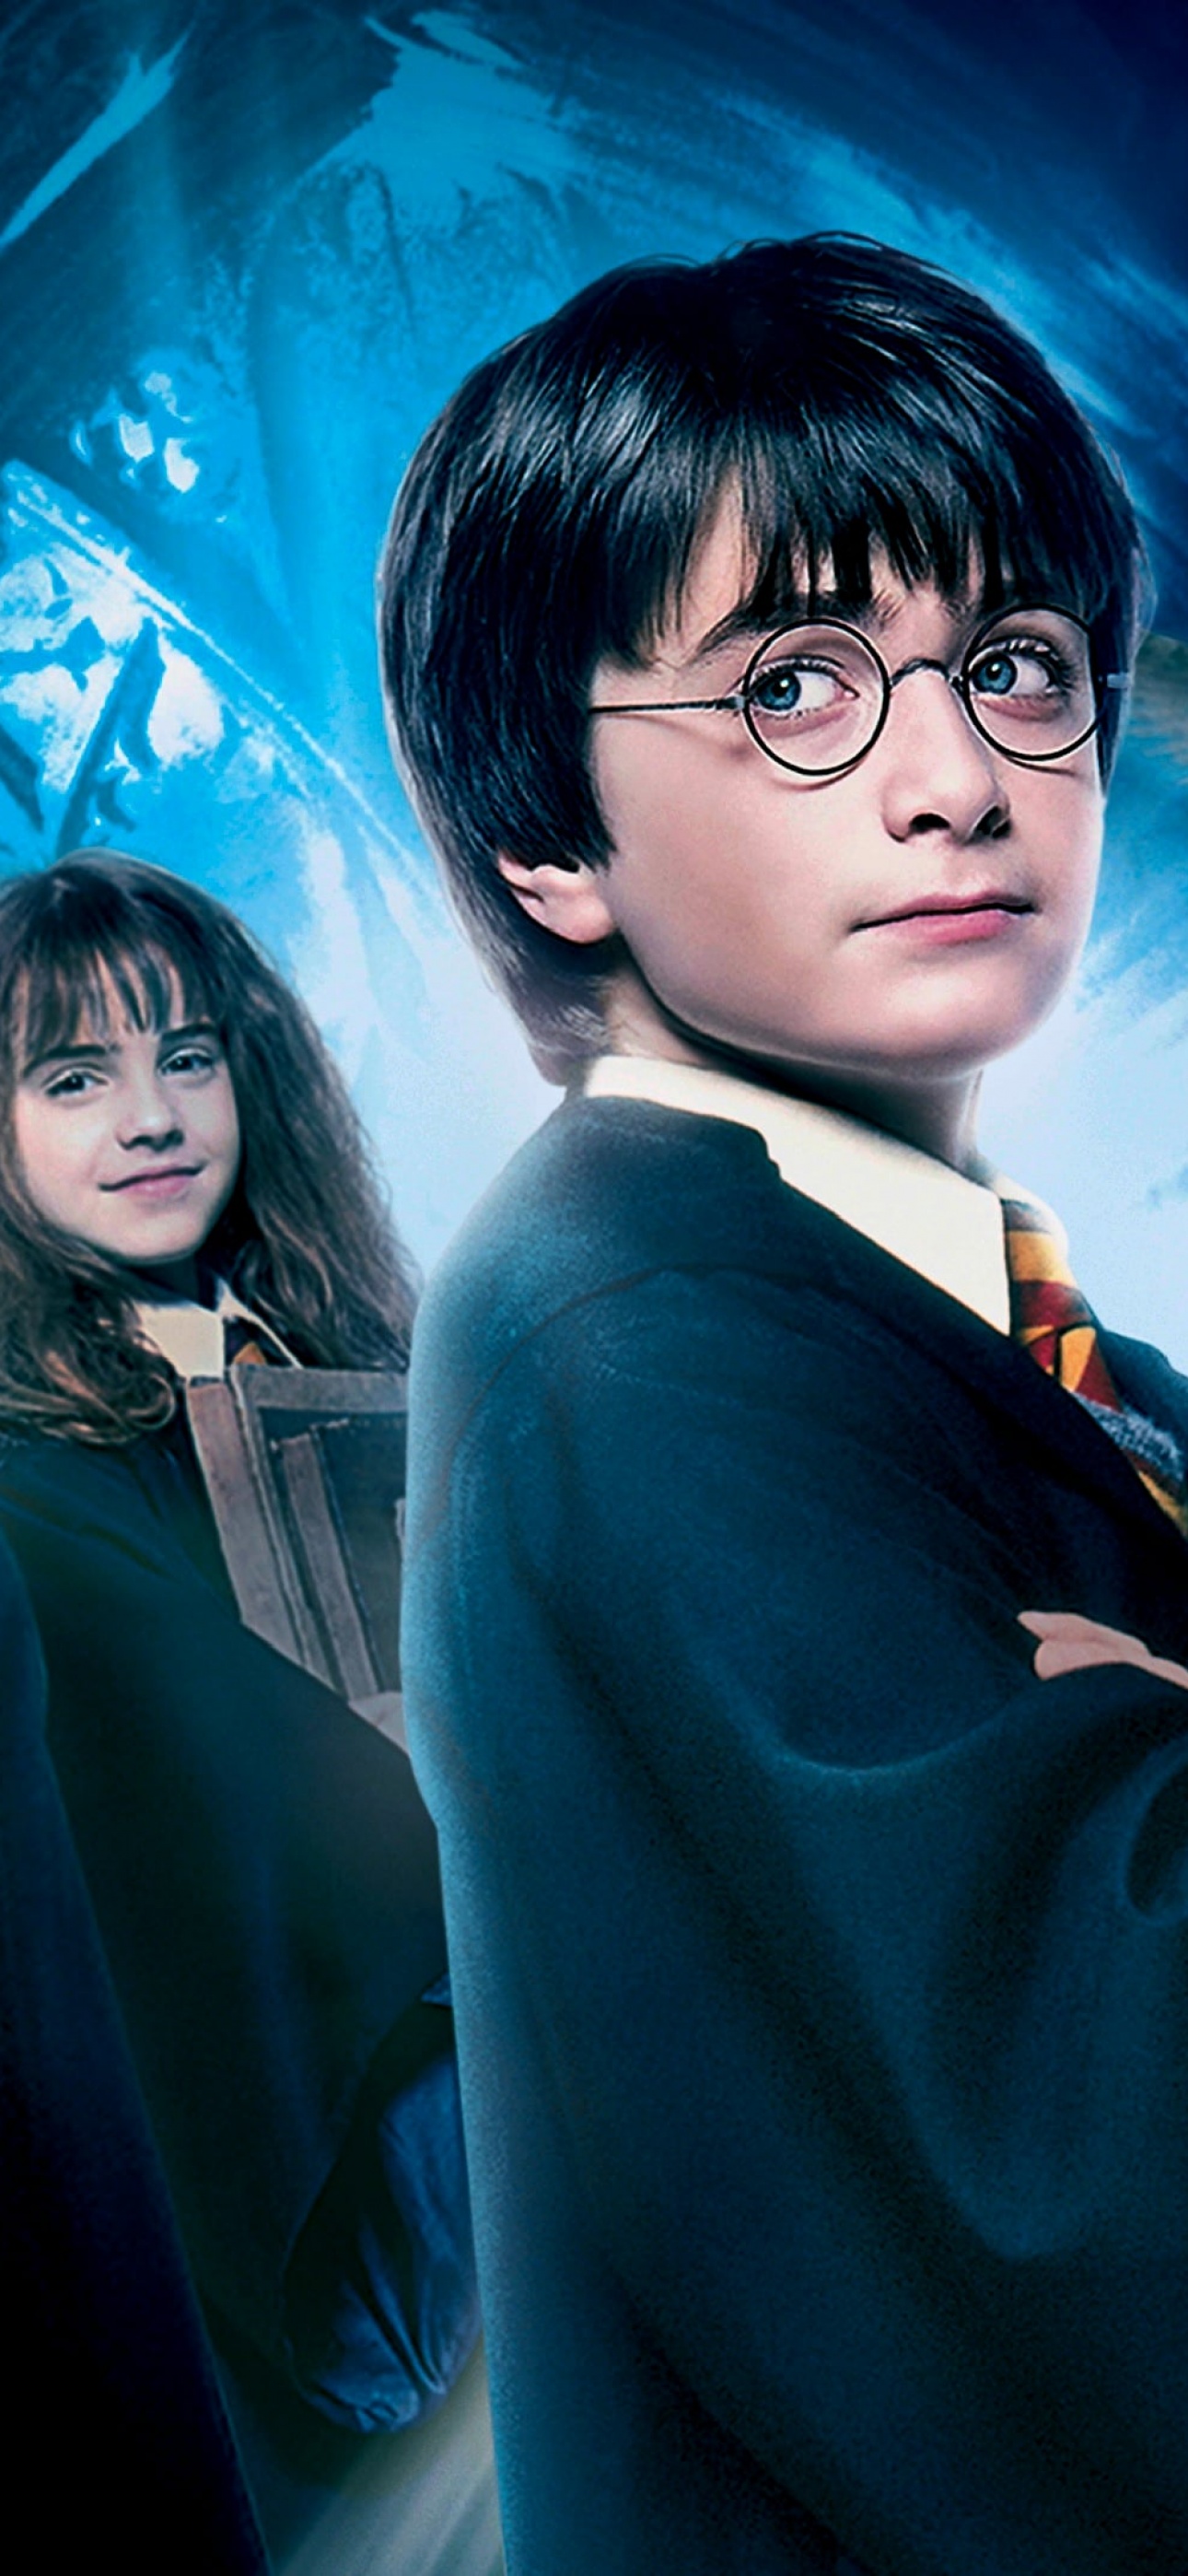 5 Japanese Anime Perfect for the 'Harry Potter' Fan - GaijinPot